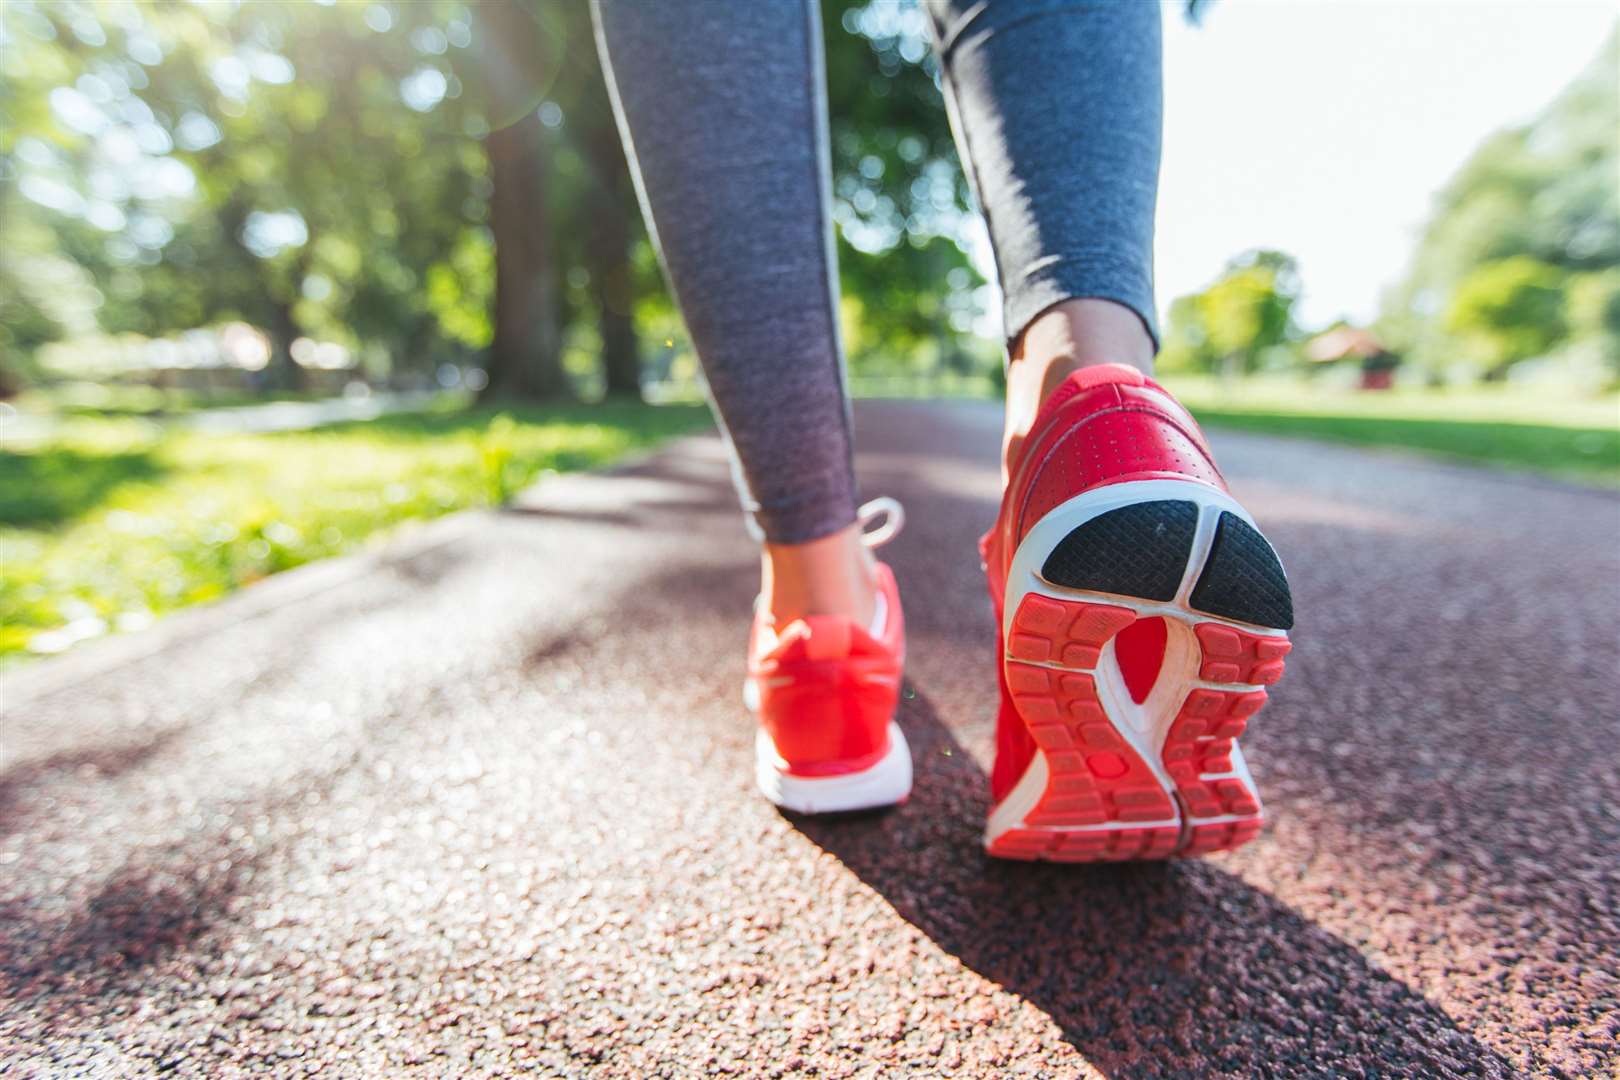 If you're new to running, start with a couch to 5k programme. Picture: iStock/PA